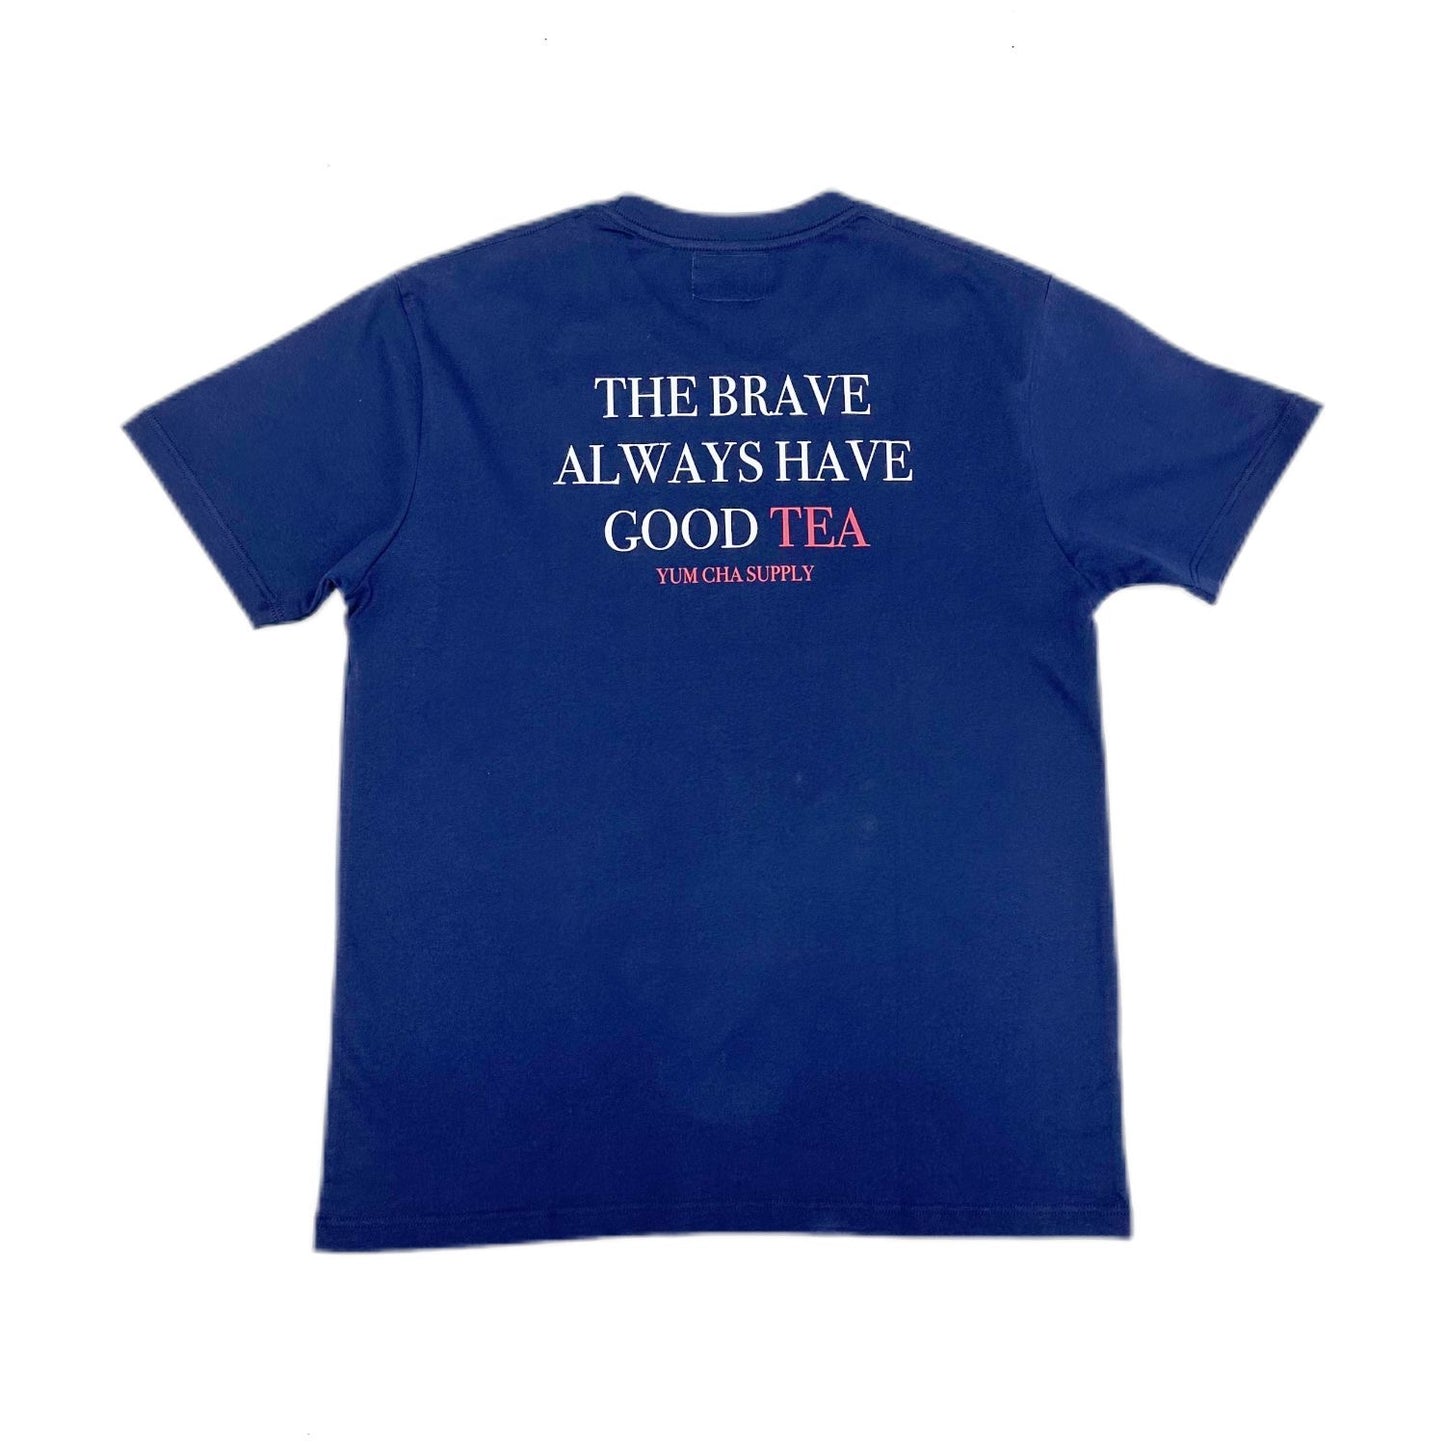 The Brave T-shirt